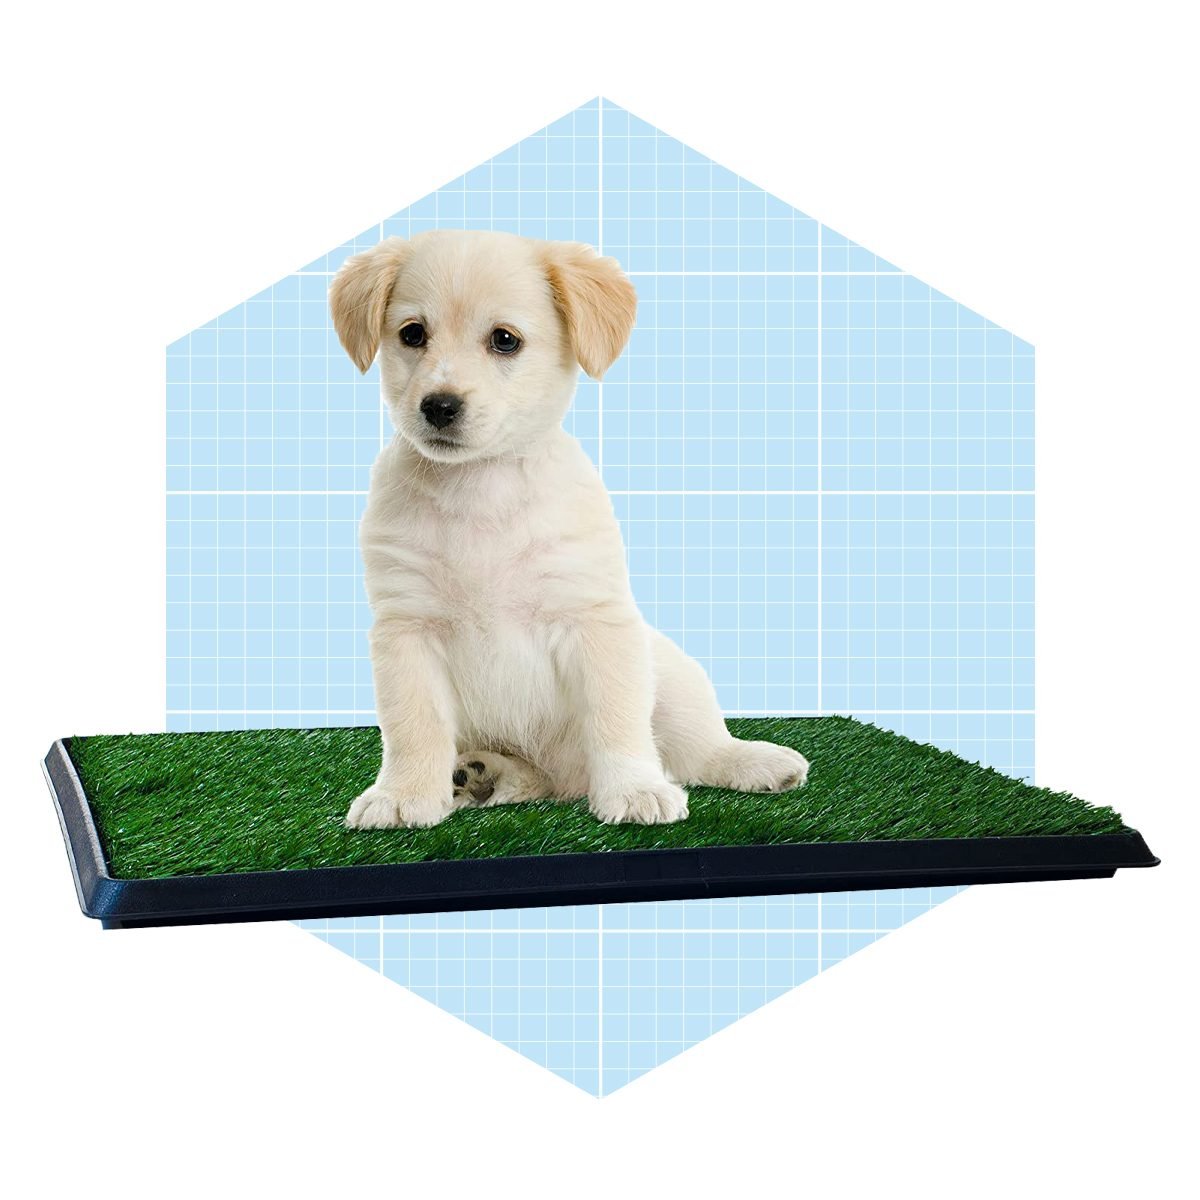 Artificial Grass Puppy Pad For Dogs And Small Pets Ecomm Amazon.com